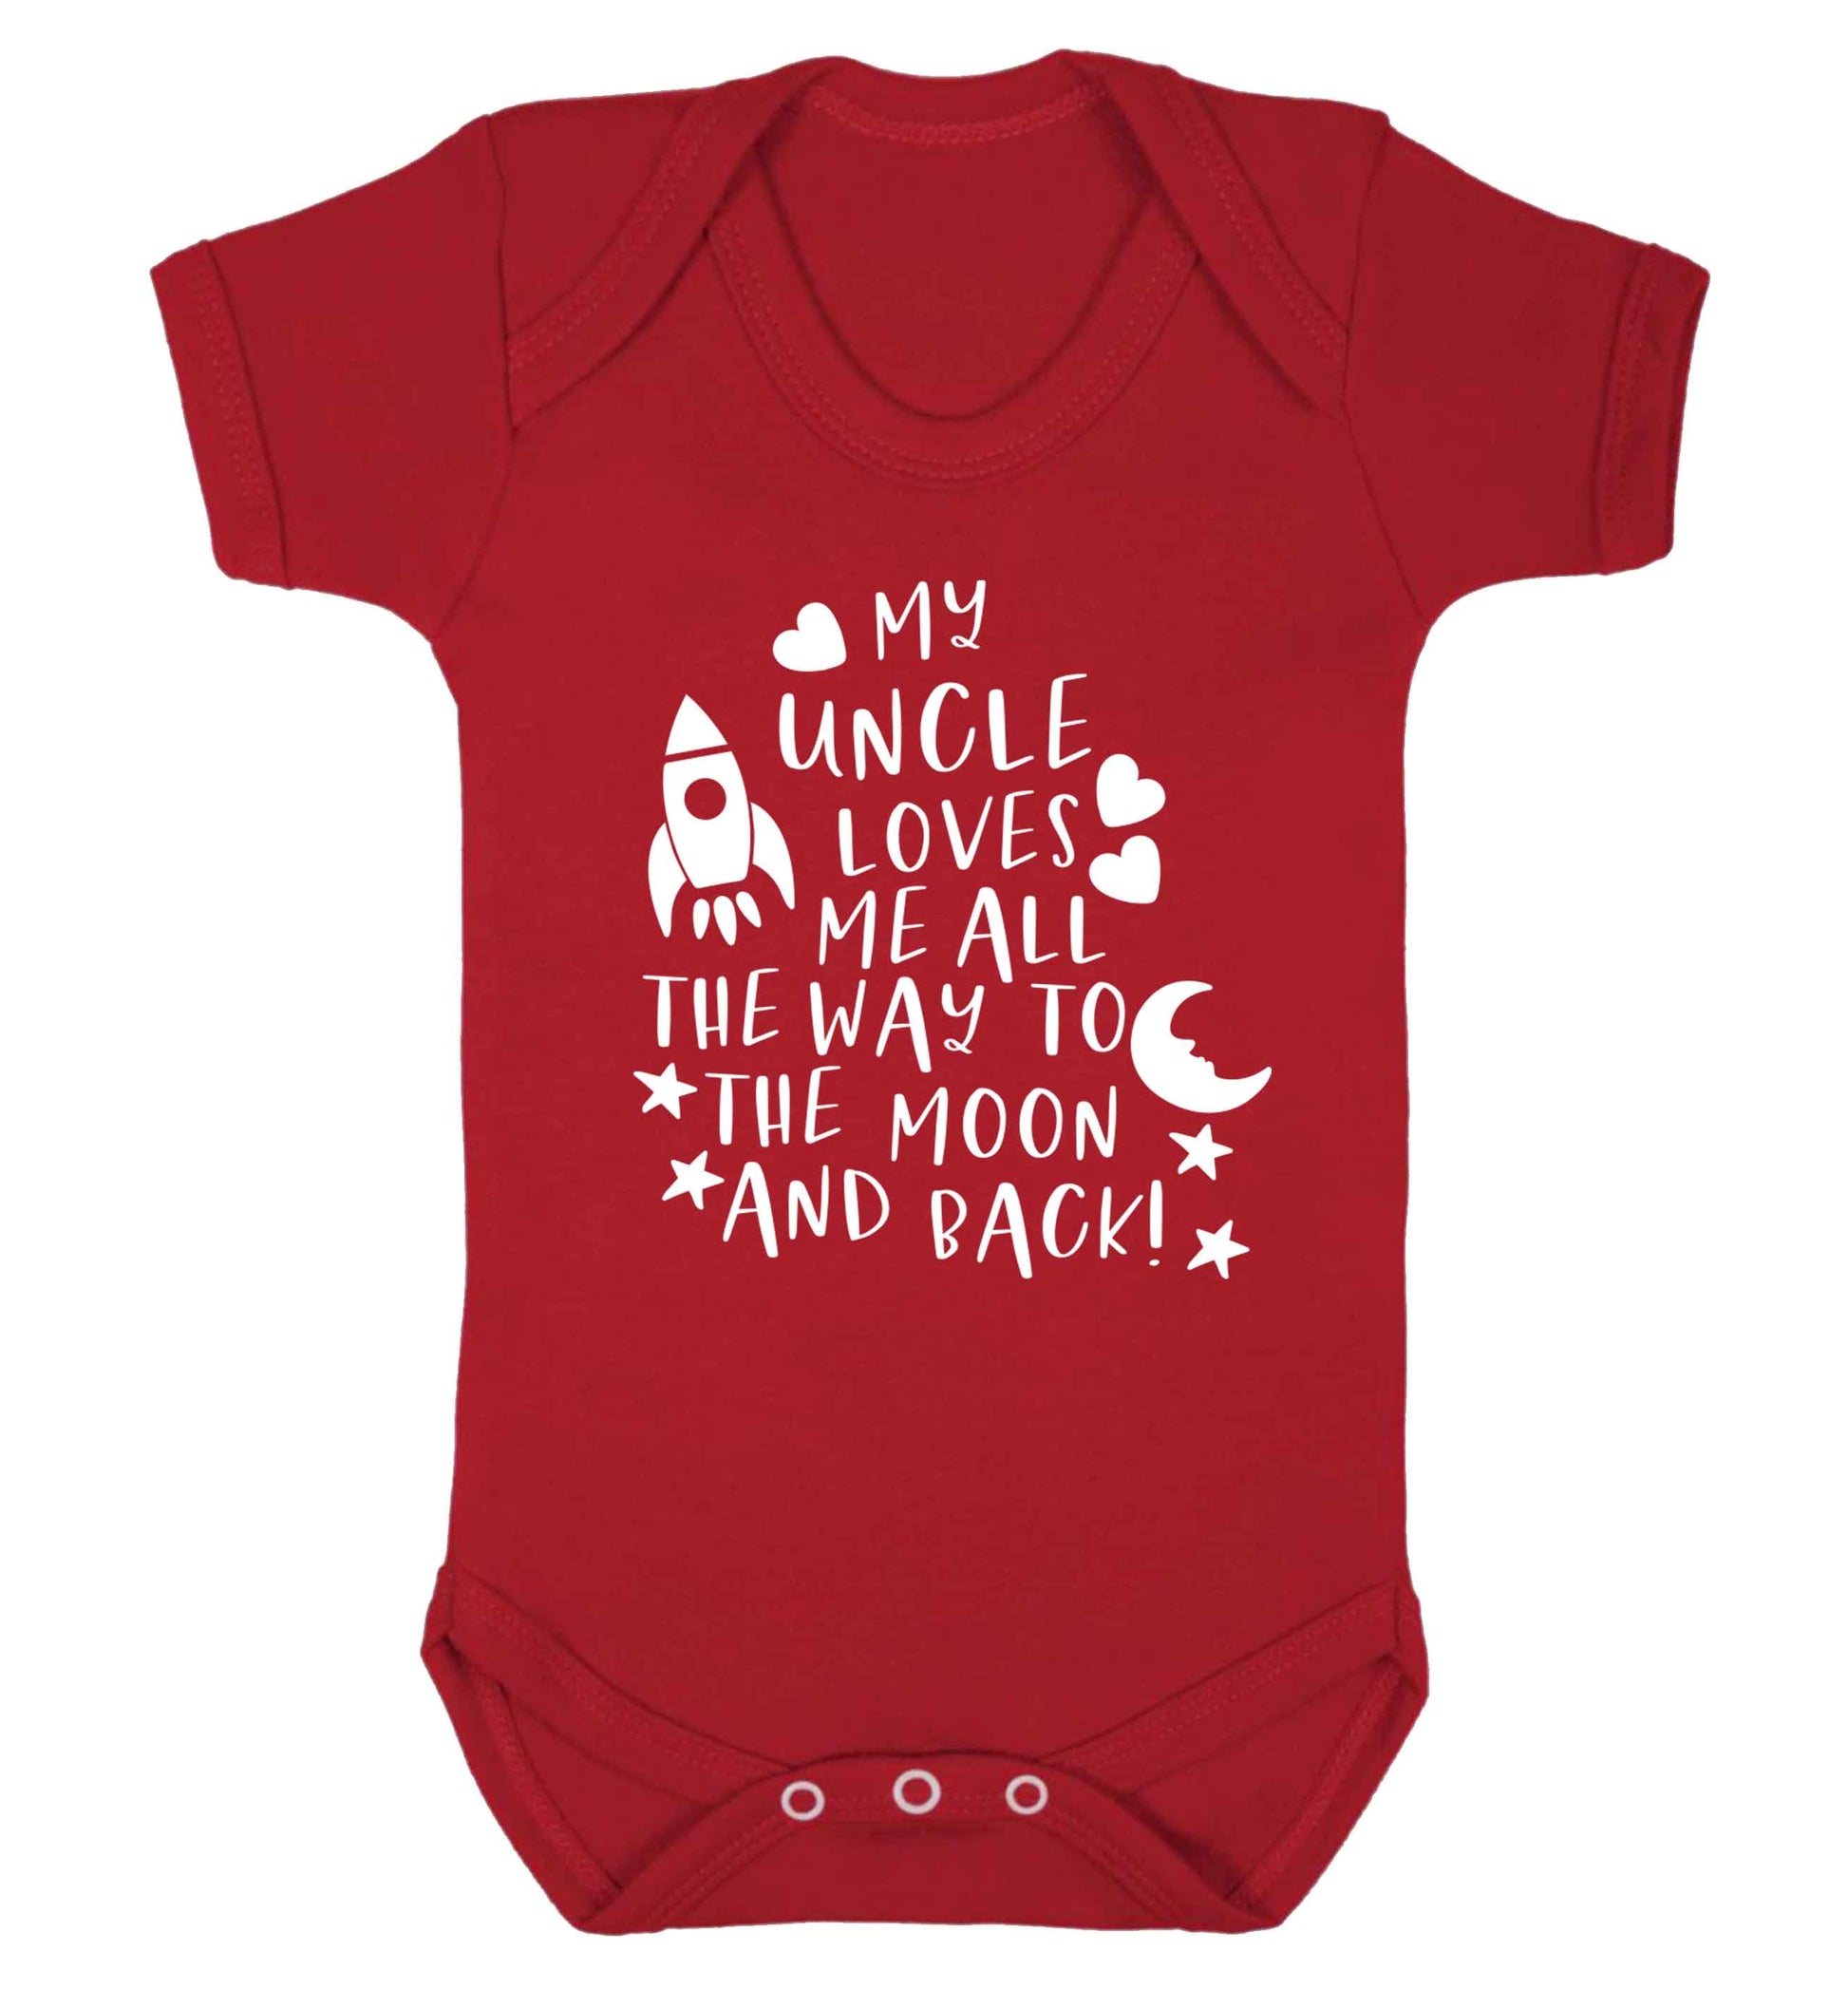 My uncle loves me all the way to the moon and back Baby Vest red 18-24 months